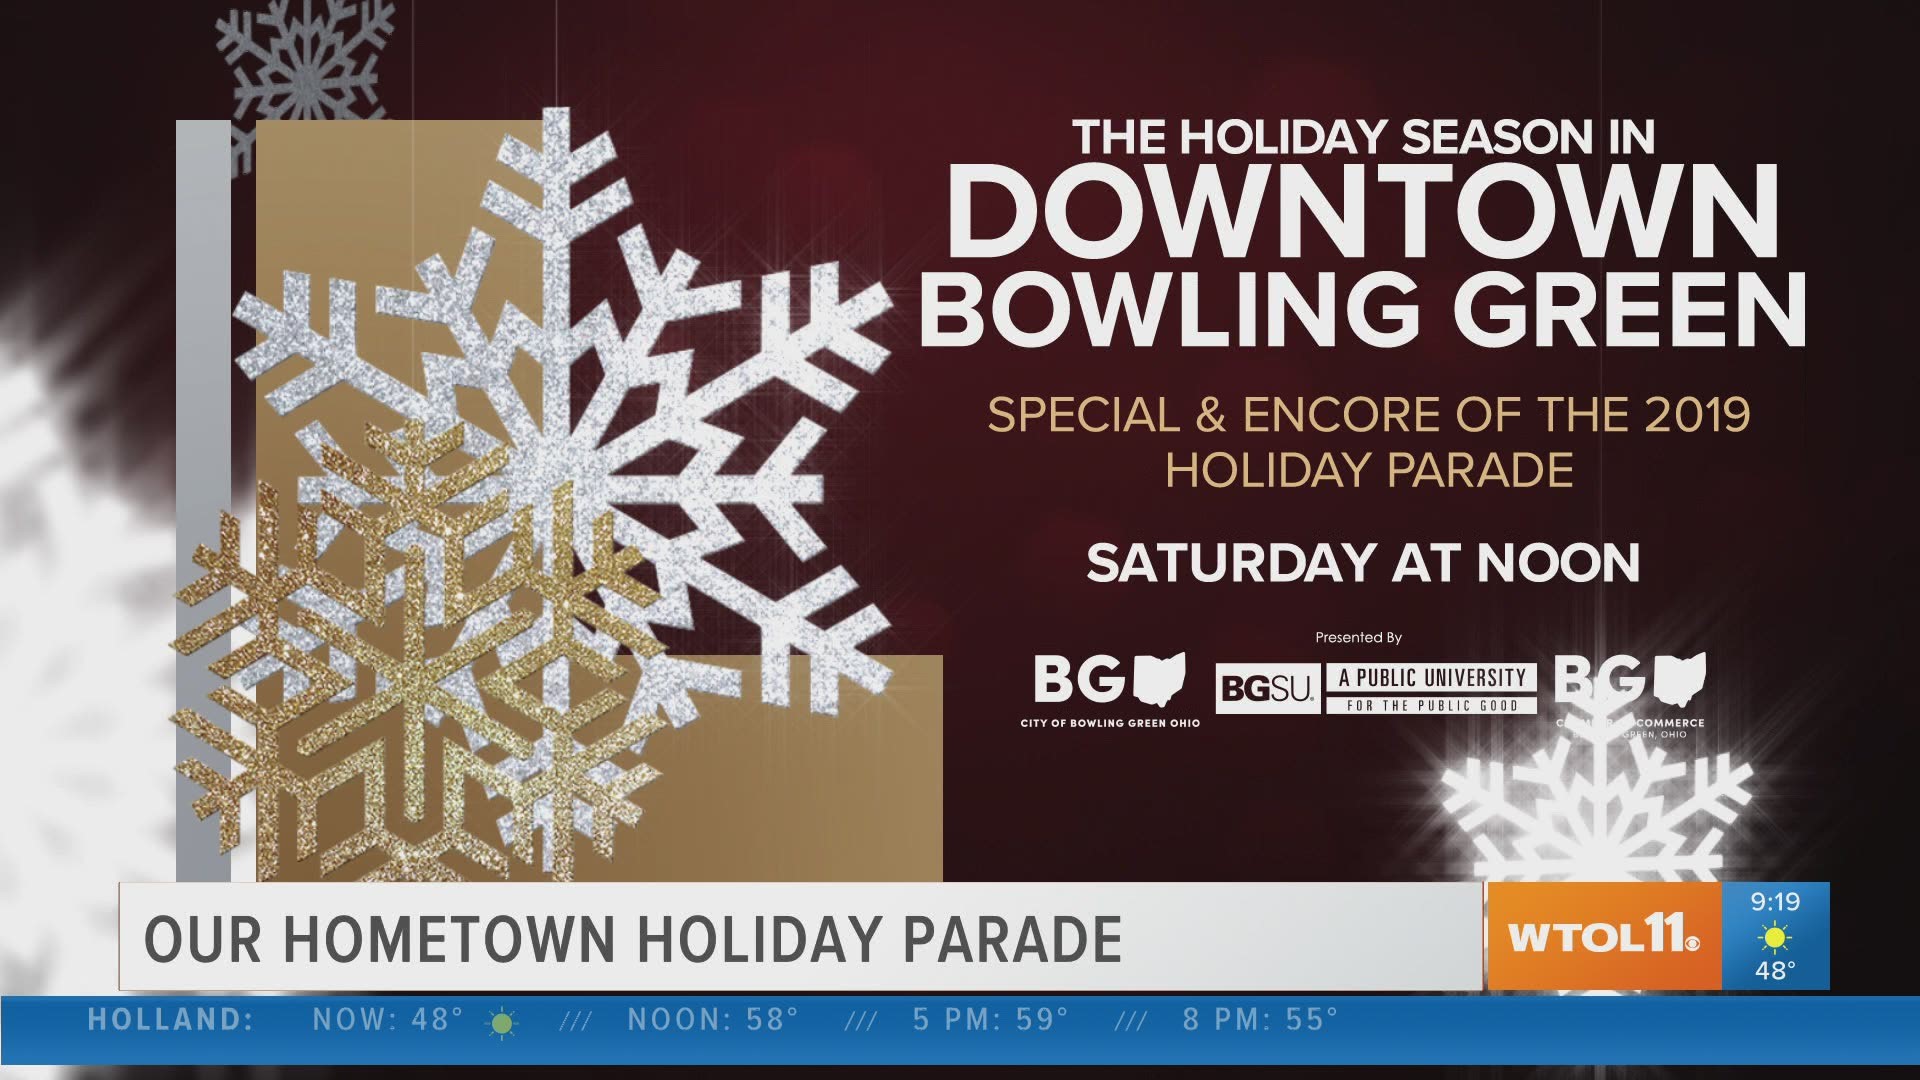 Mary Hinkleman with the Bowling Green Chamber of Commerce joins Your Day to discuss the big changes to this year's Bowling Green holiday parade.